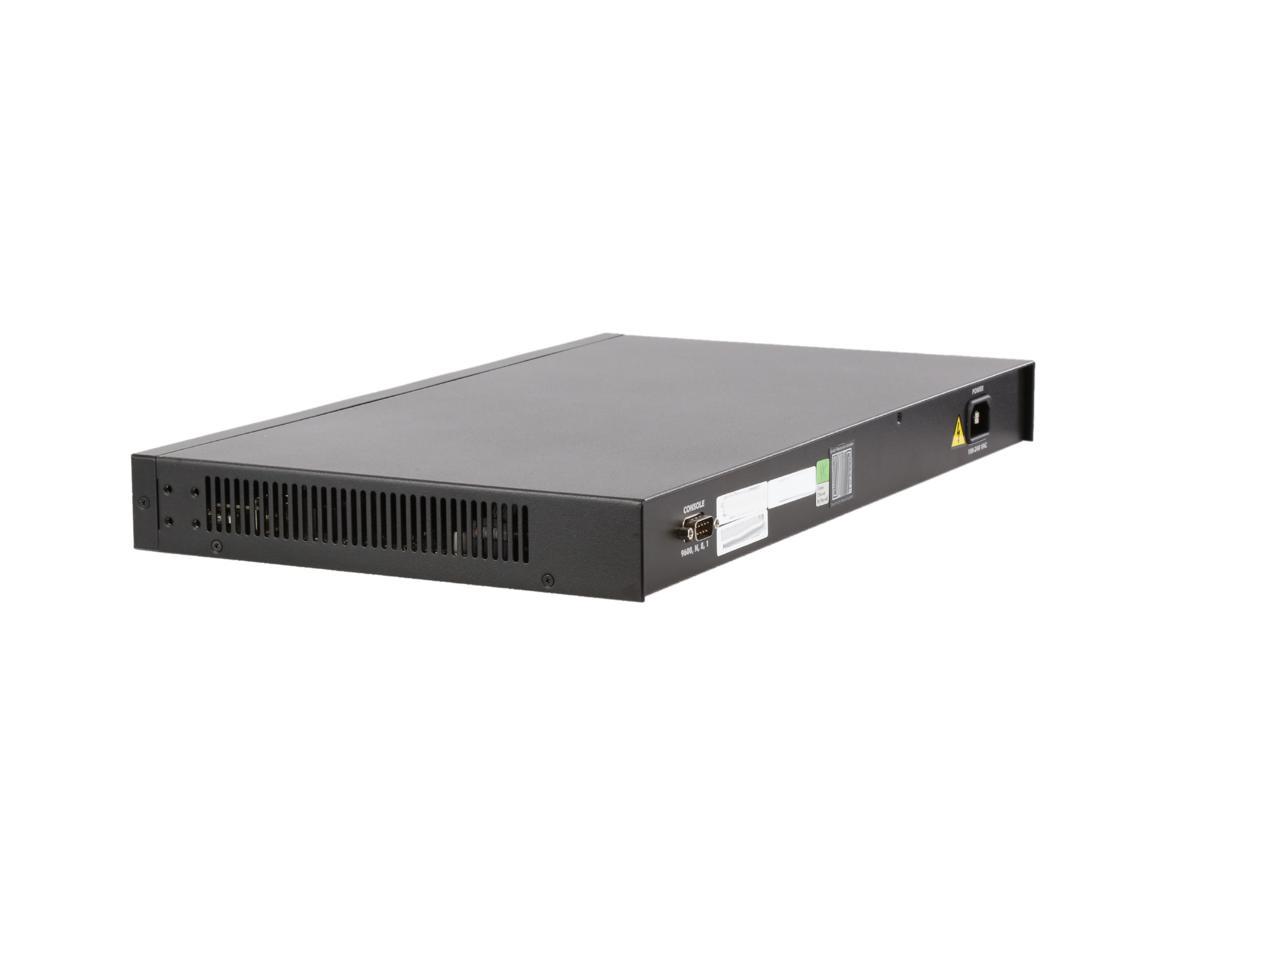 Dell PowerConnect 2848 Smart switch 48 ports - Newegg.com